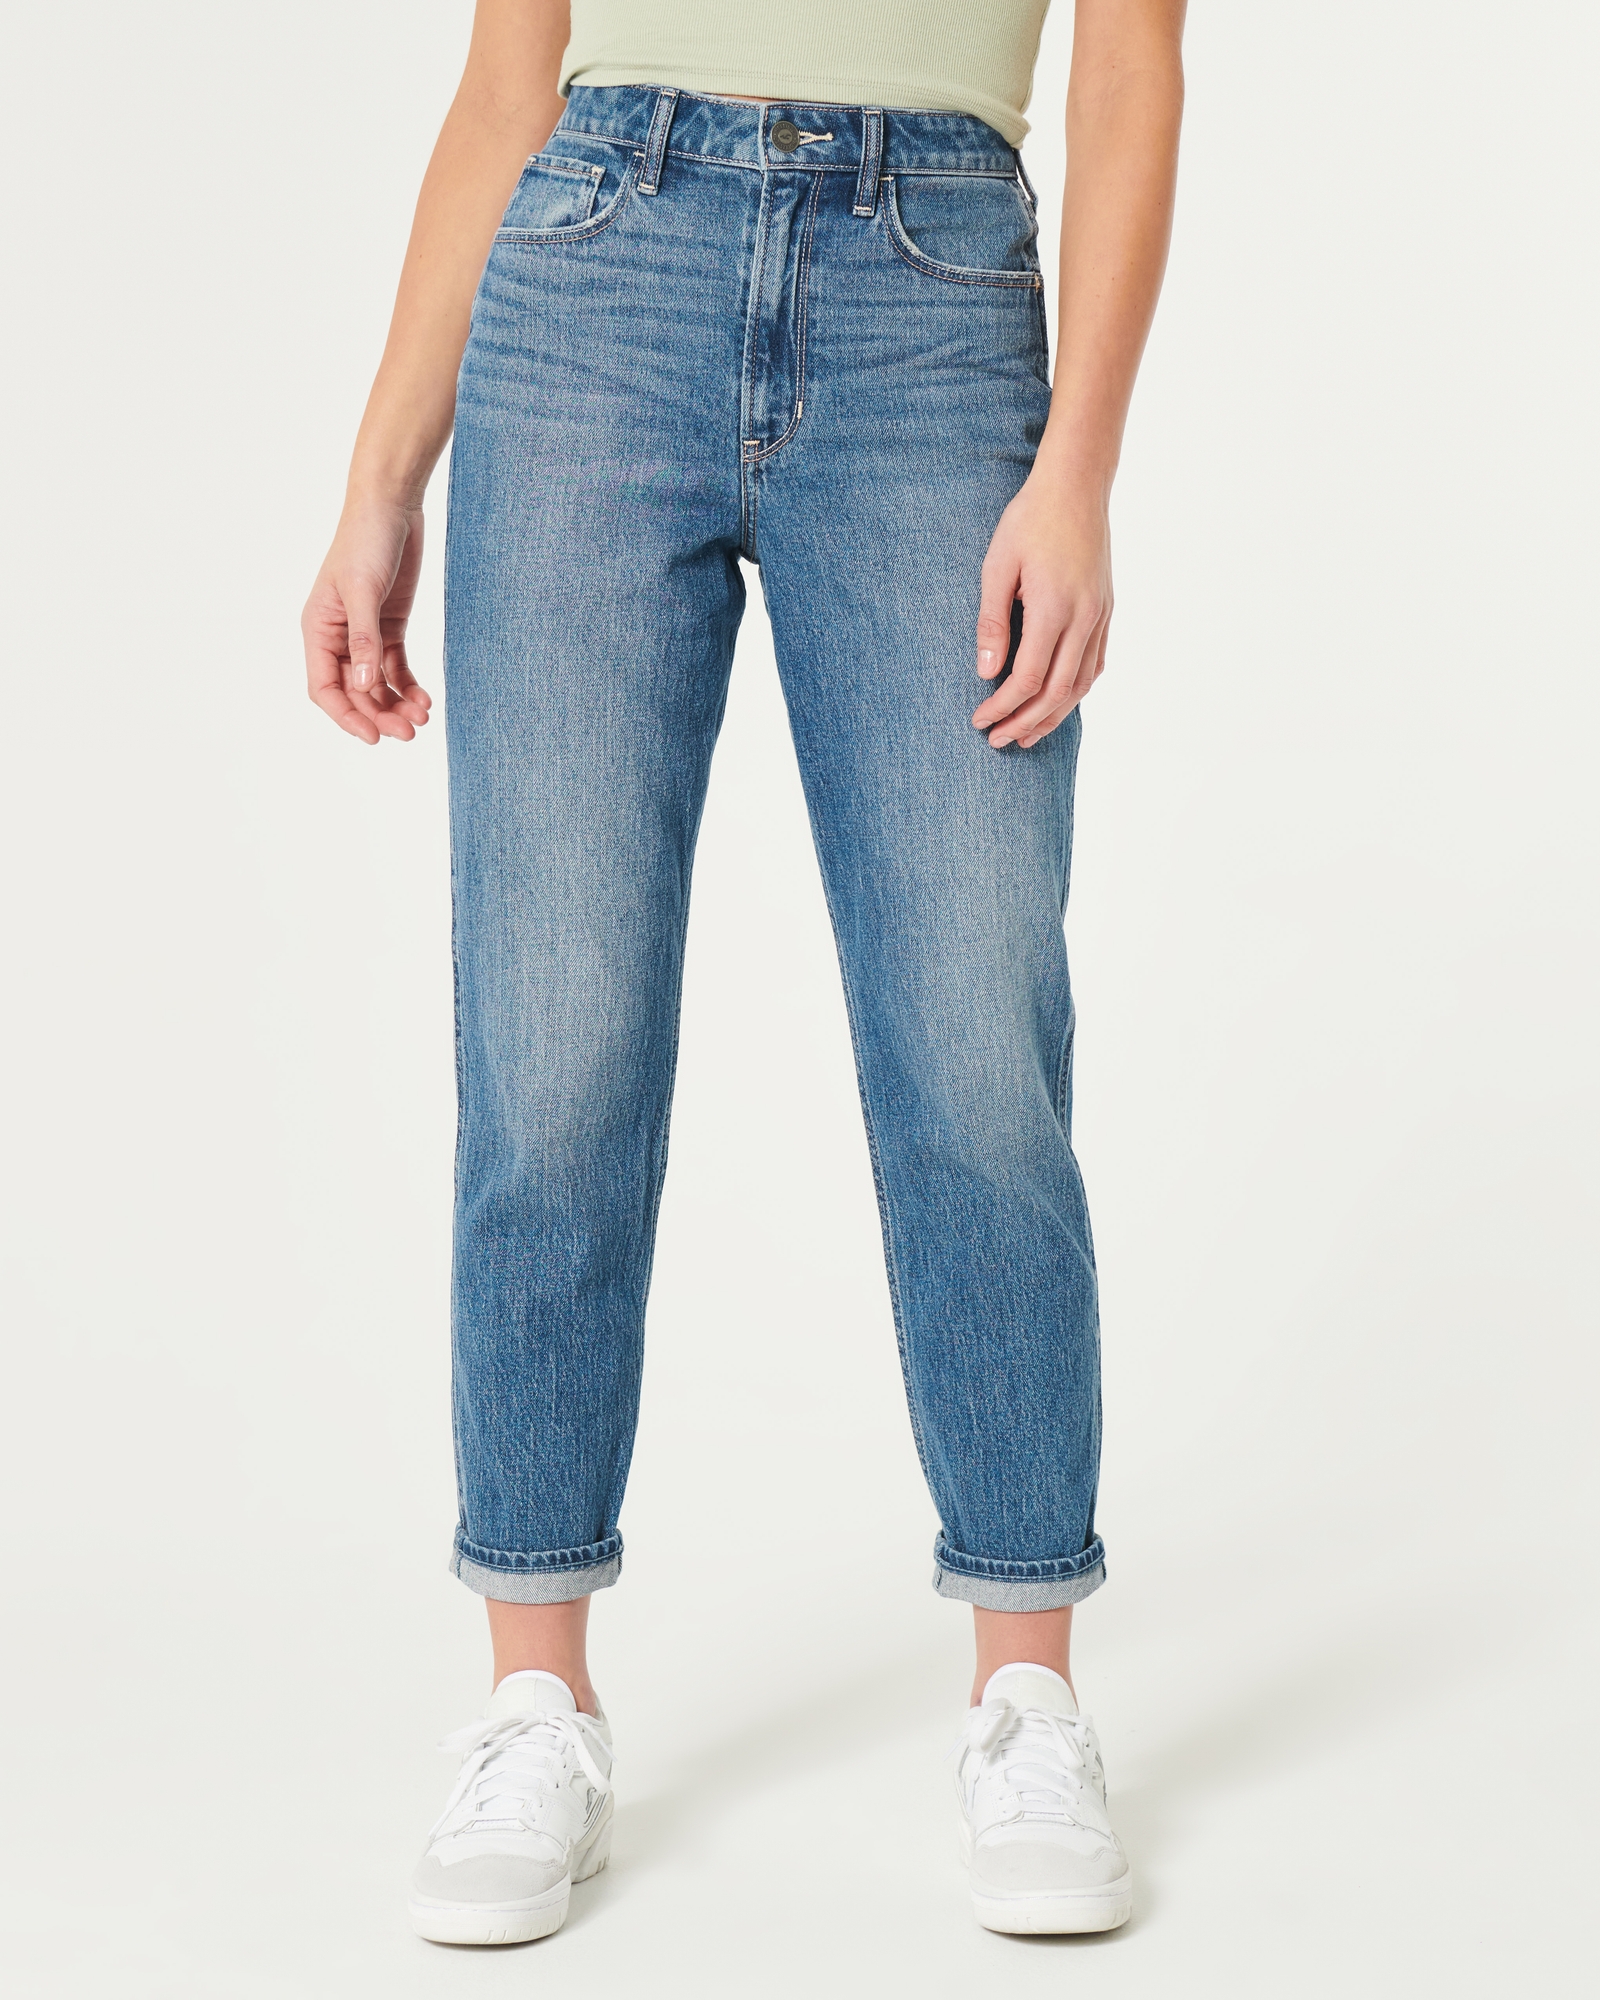 https://img.hollisterco.com/is/image/anf/KIC_355-4237-0108-276_model2.jpg?policy=product-extra-large